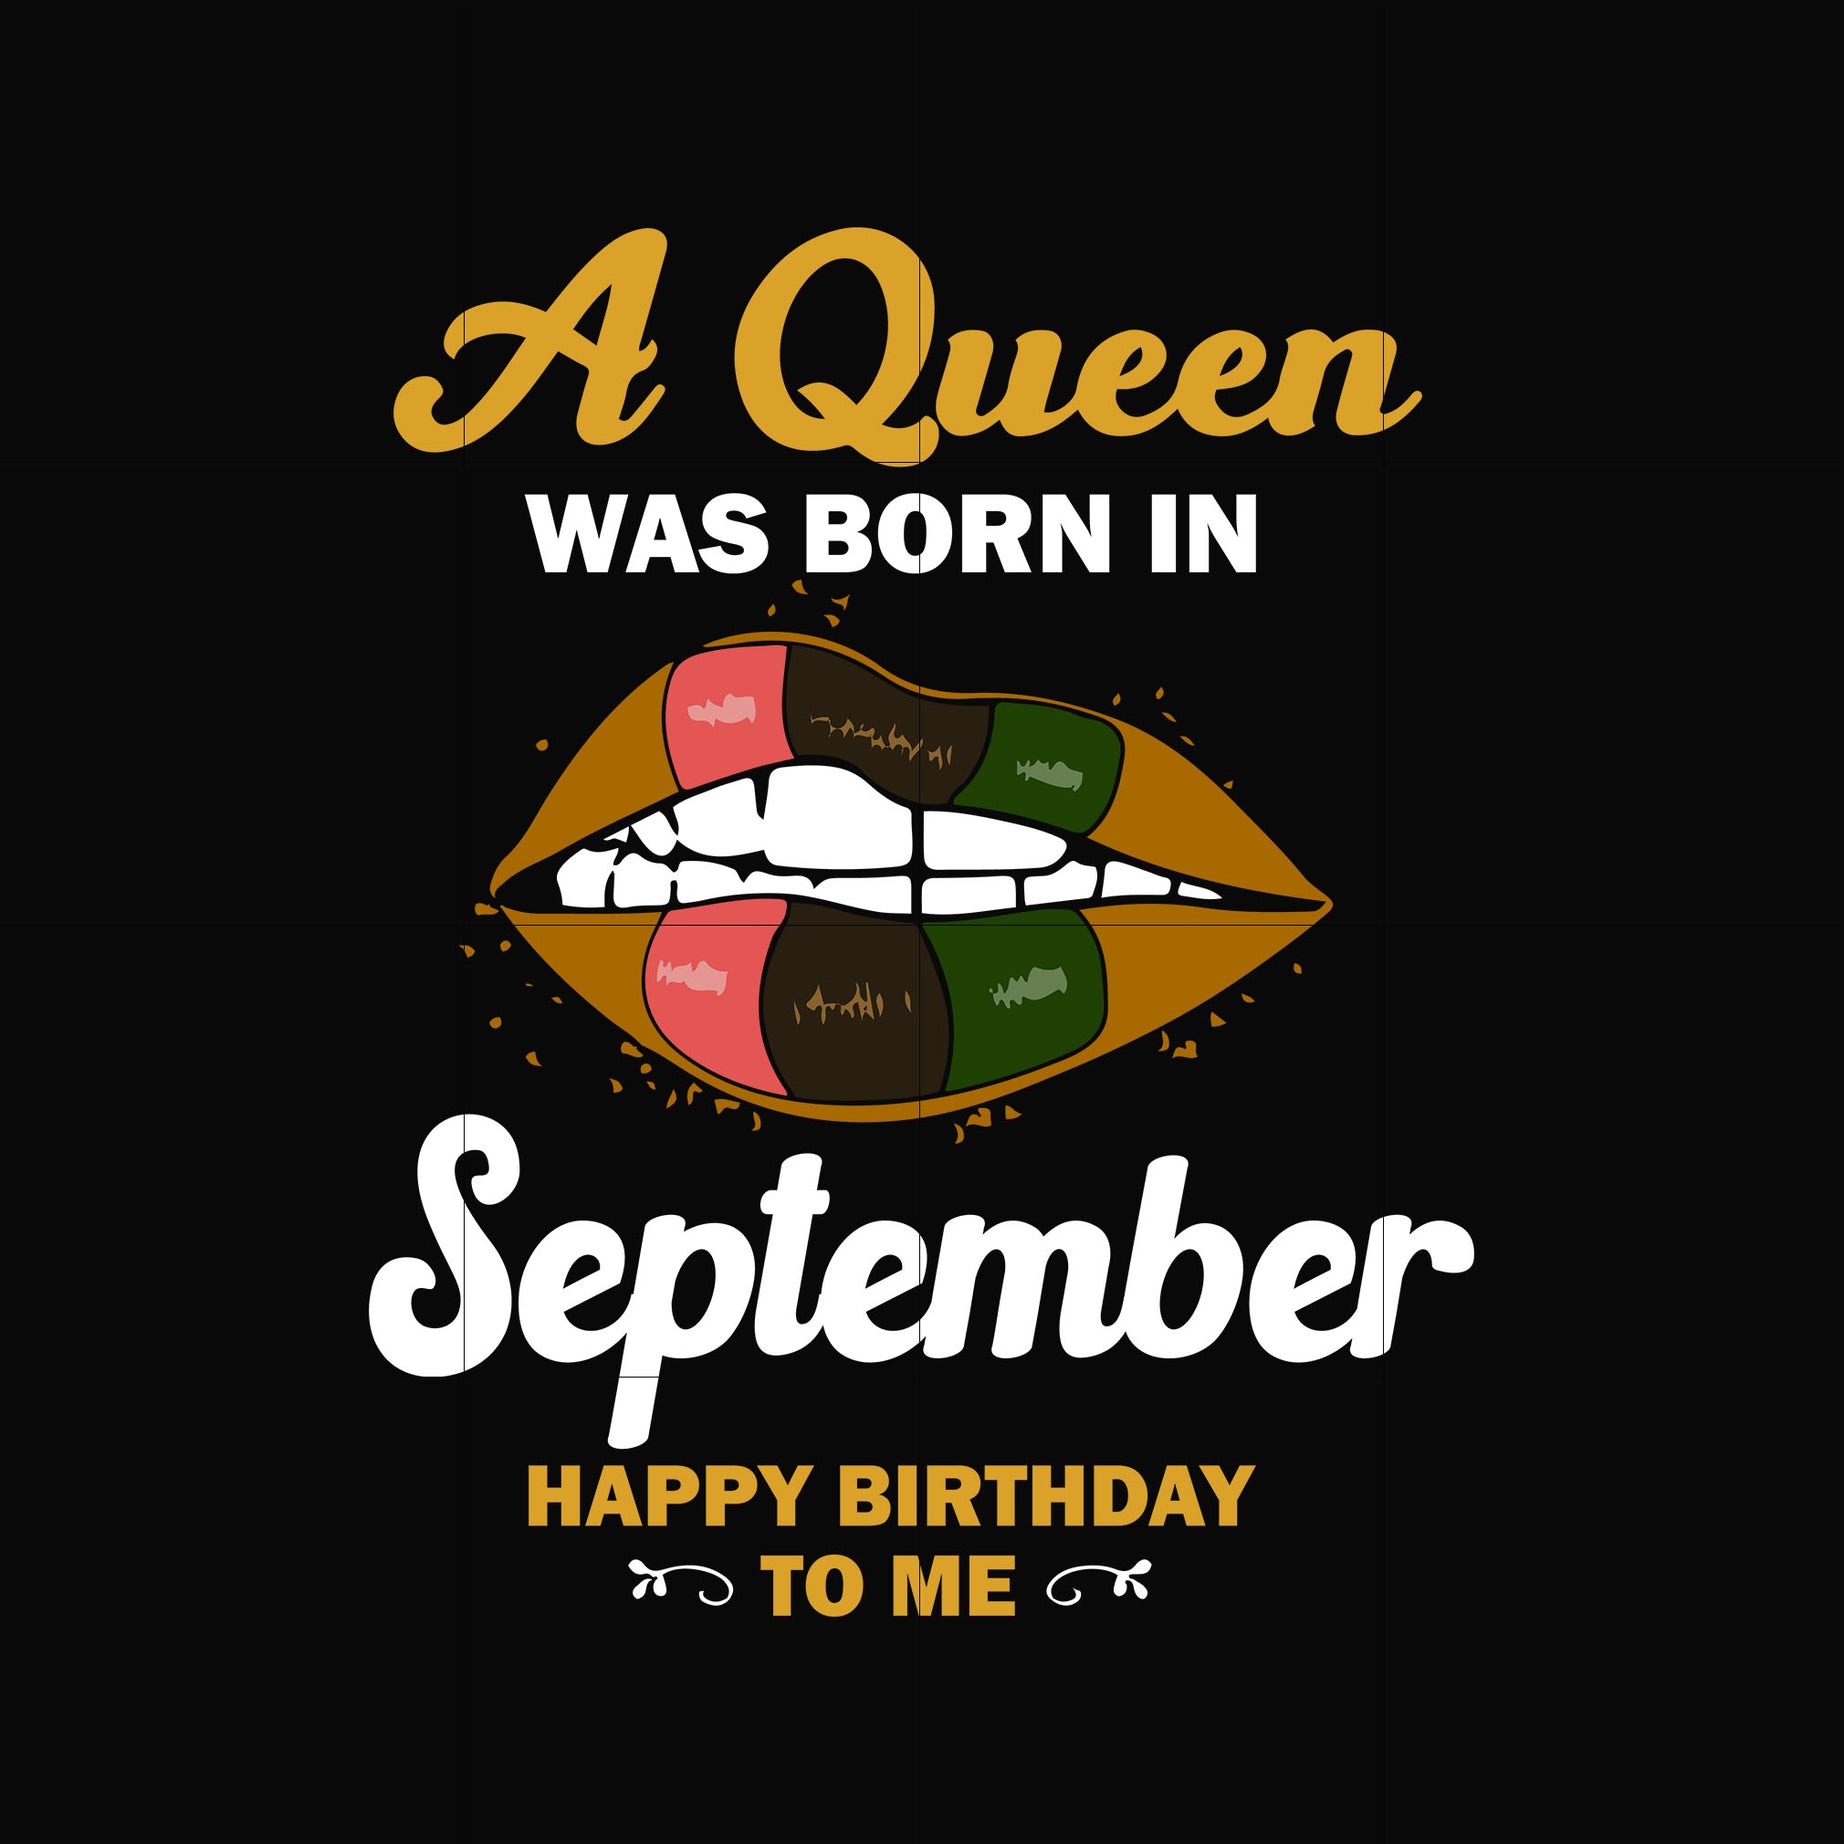 A queen was born in September happy birthday to me svg, png, dxf, eps digital file BD0130